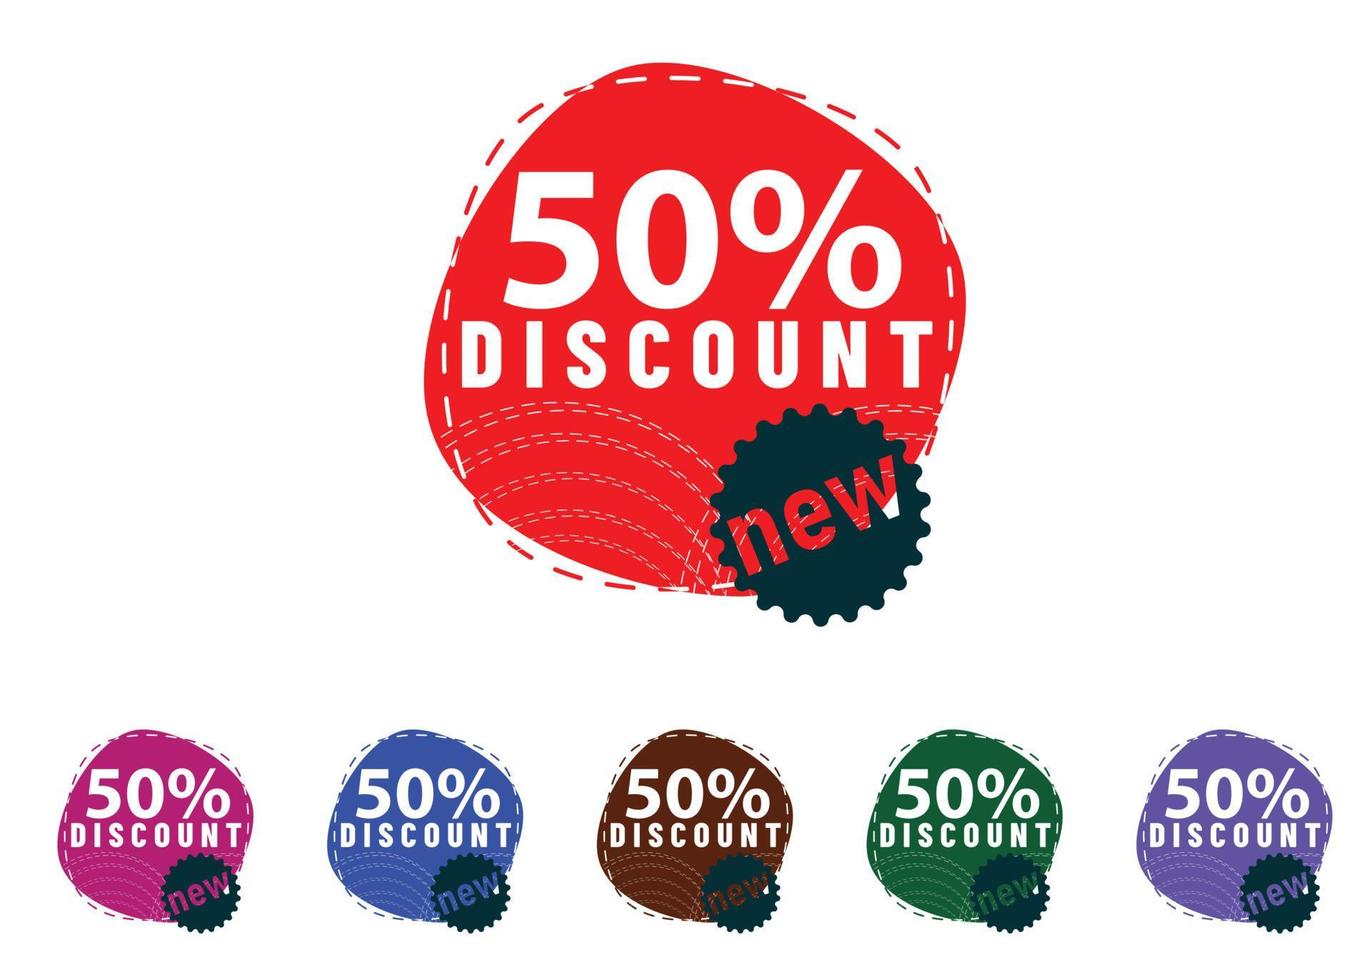 50 percent discount new offer logo and icon design vector